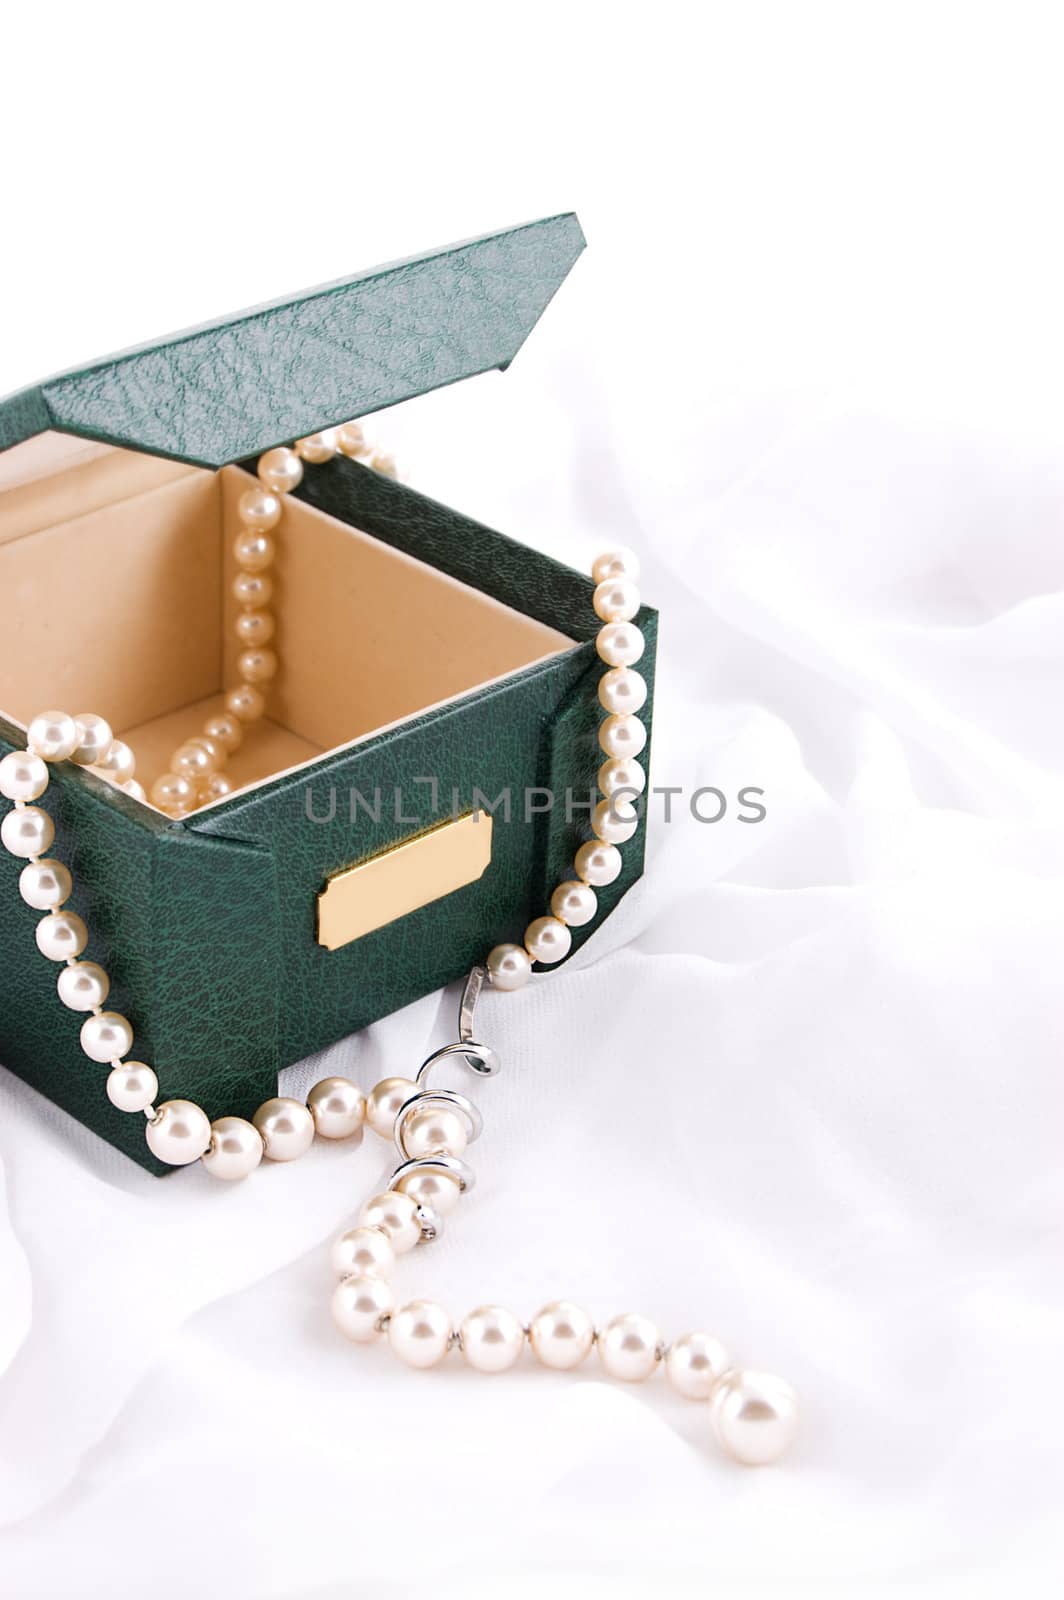 Pearl necklace in box over white fabric